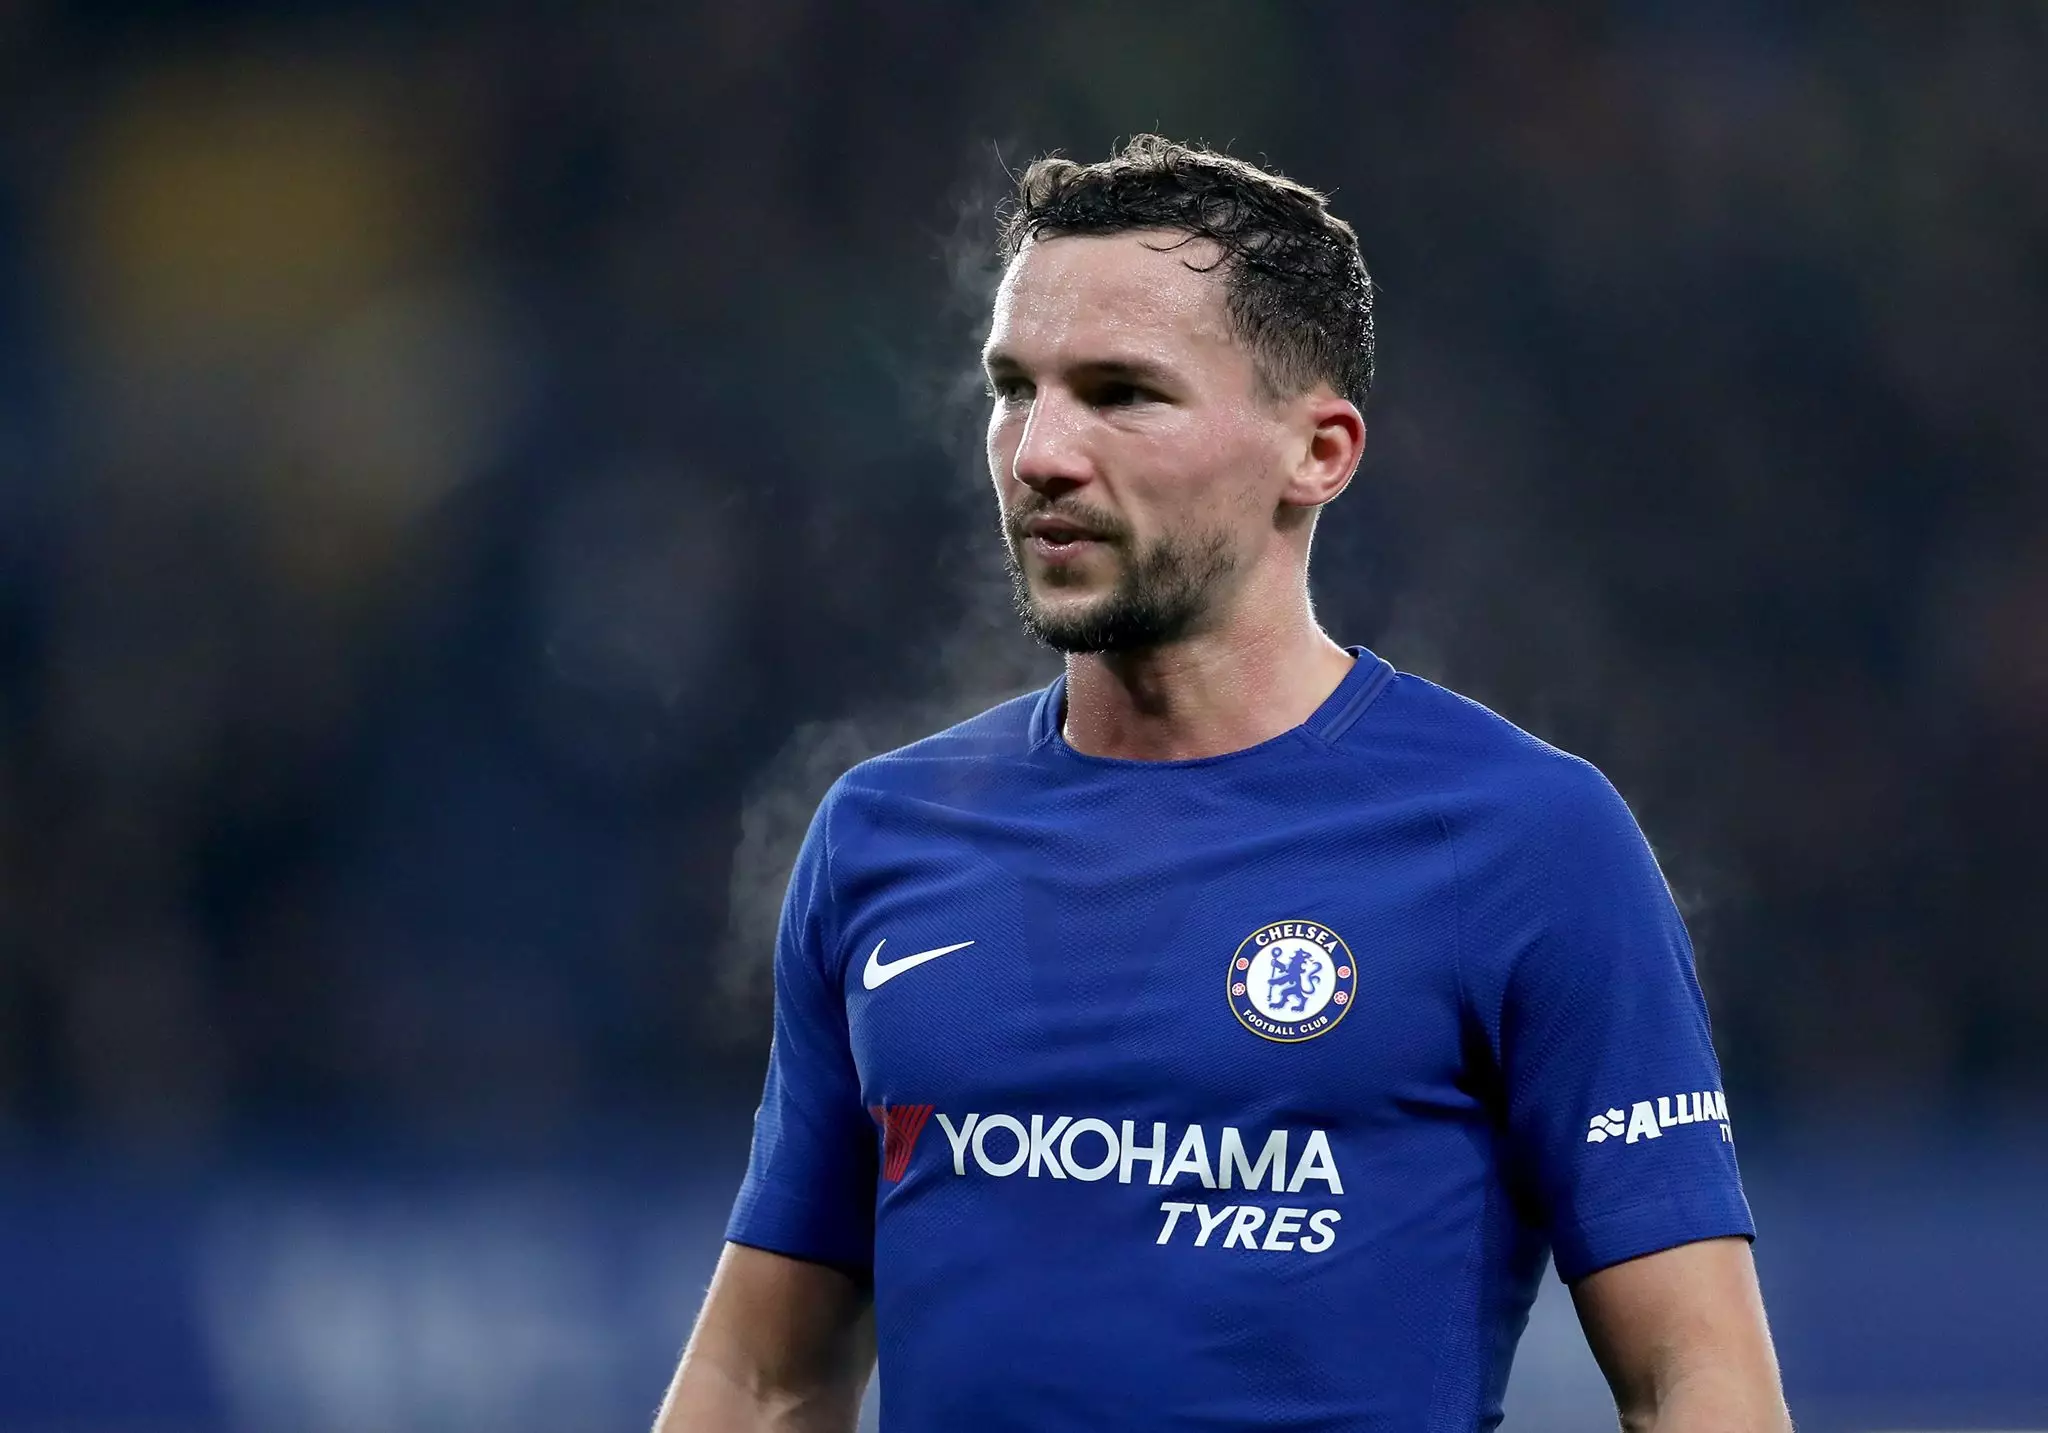 Drinkwater in action for Chelsea. Image: PA